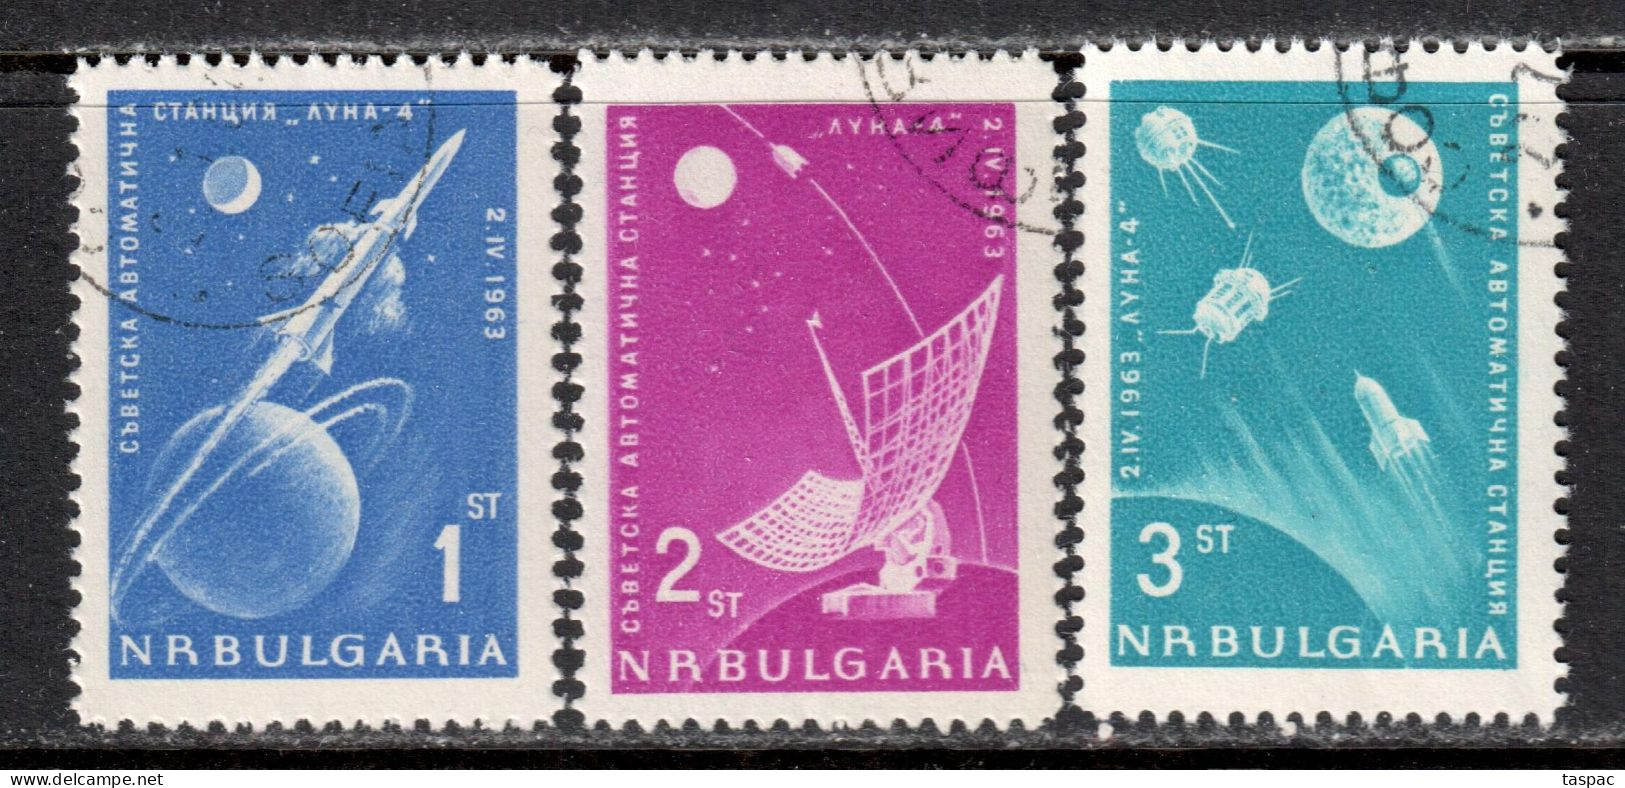 Bulgaria 1963 Mi# 1388-1390 Used - Russia's Rocket To The Moon / Space - Usados